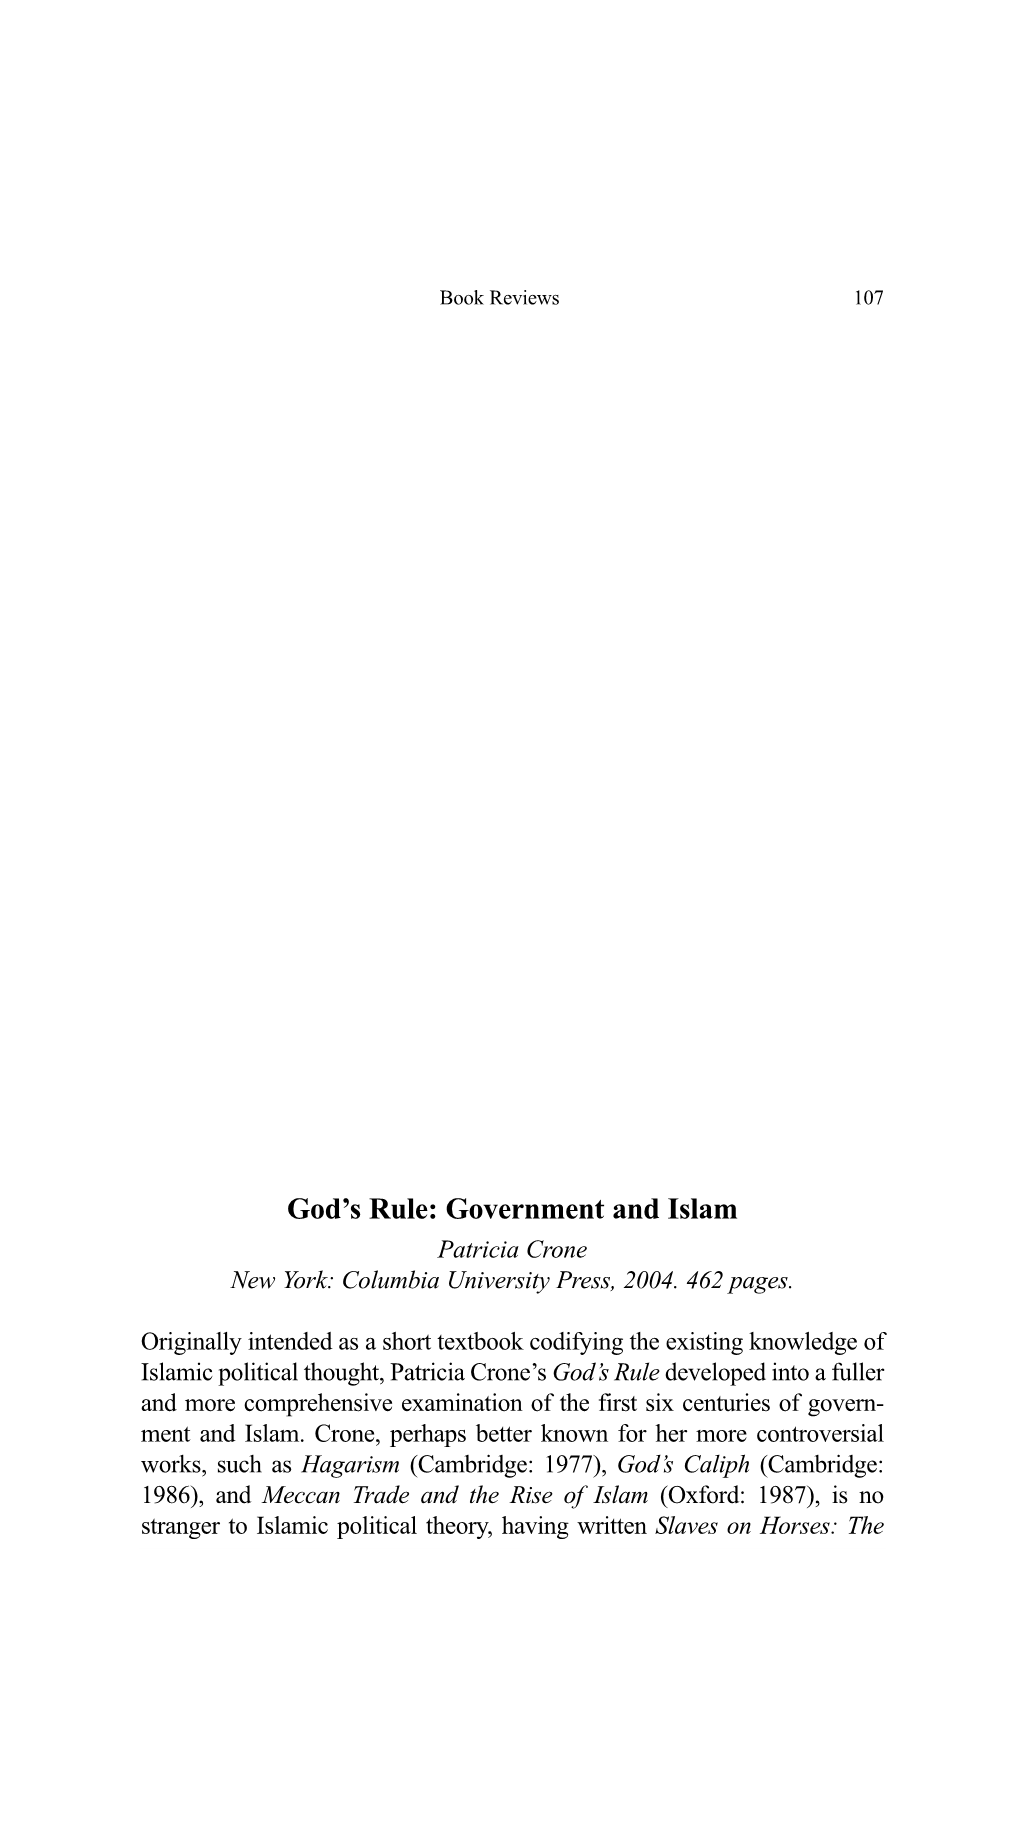 God's Rule: Government and Islam